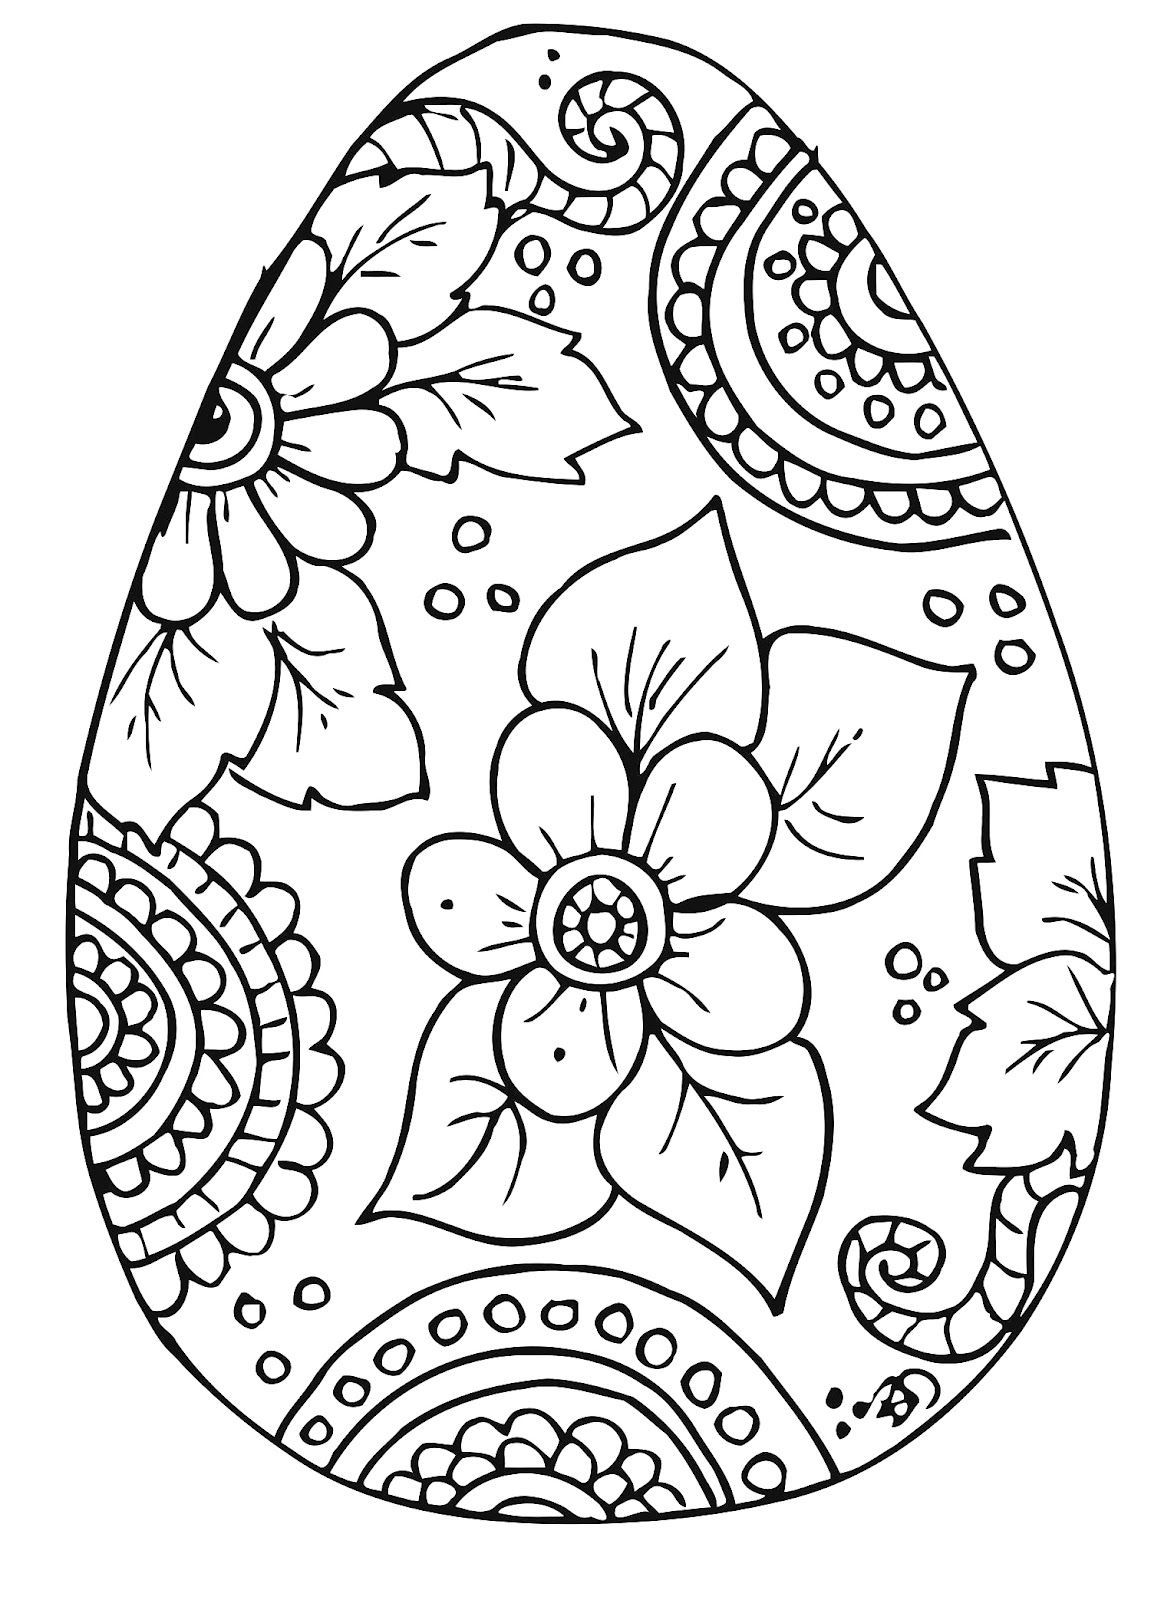 10 Cool Free Printable Easter Coloring Pages For Kids Who&amp;#039;ve Moved - Free Printable Easter Basket Coloring Pages